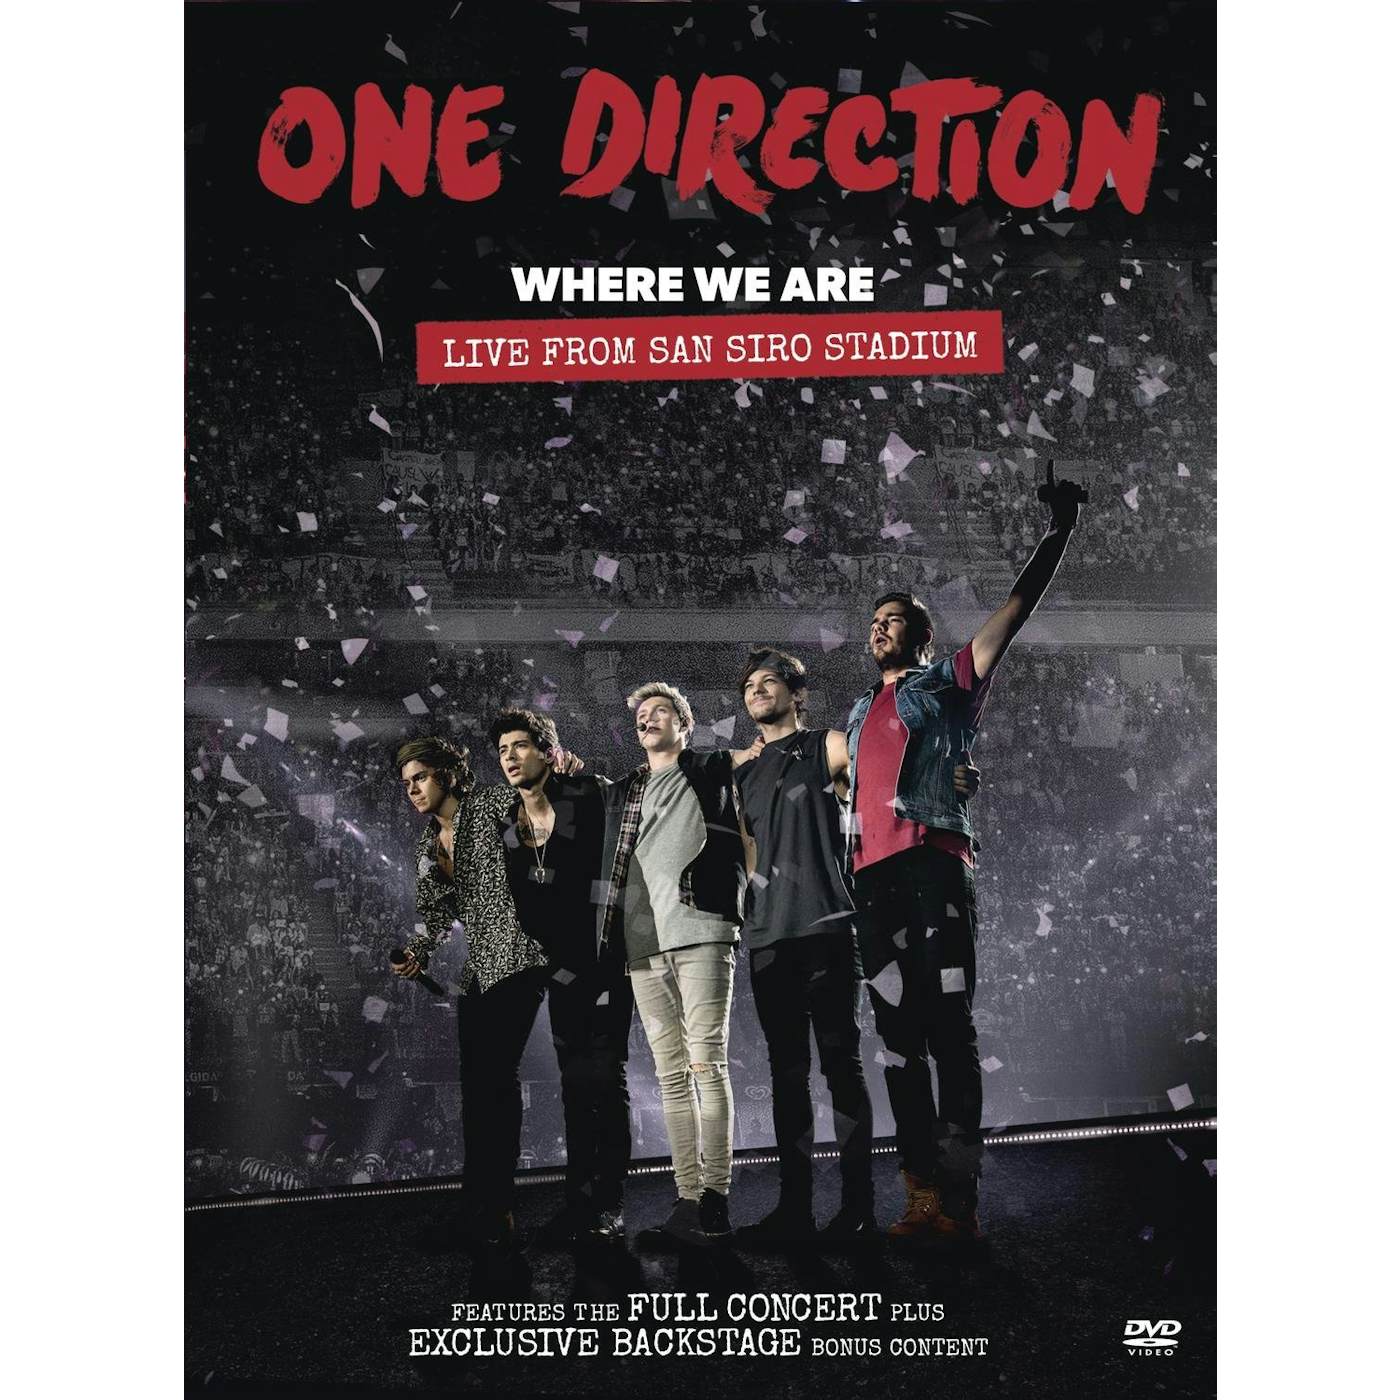 One Direction WHERE WE ARE: LIVE FROM SAN SIRO STADIUM DVD